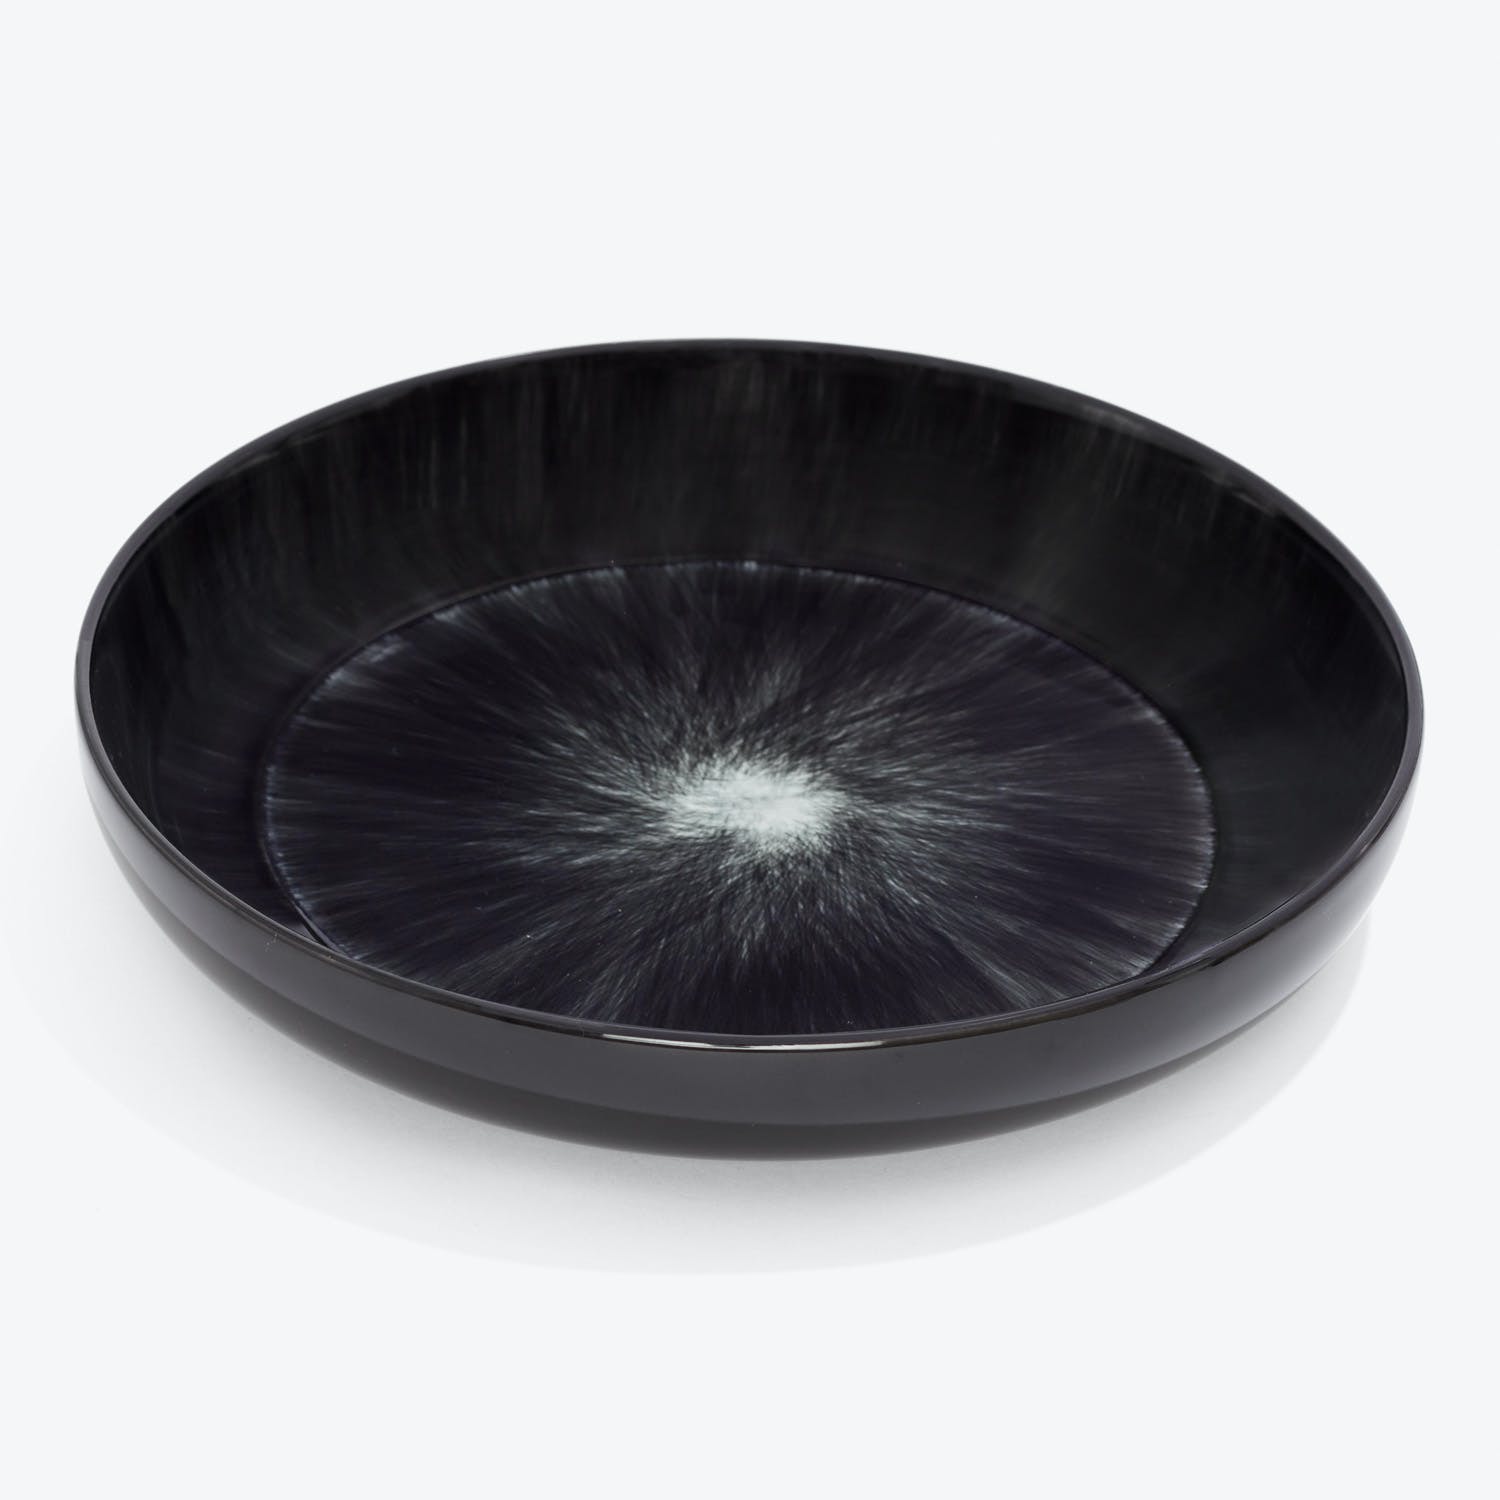 Black plate with unique starburst design, perfect for serving food